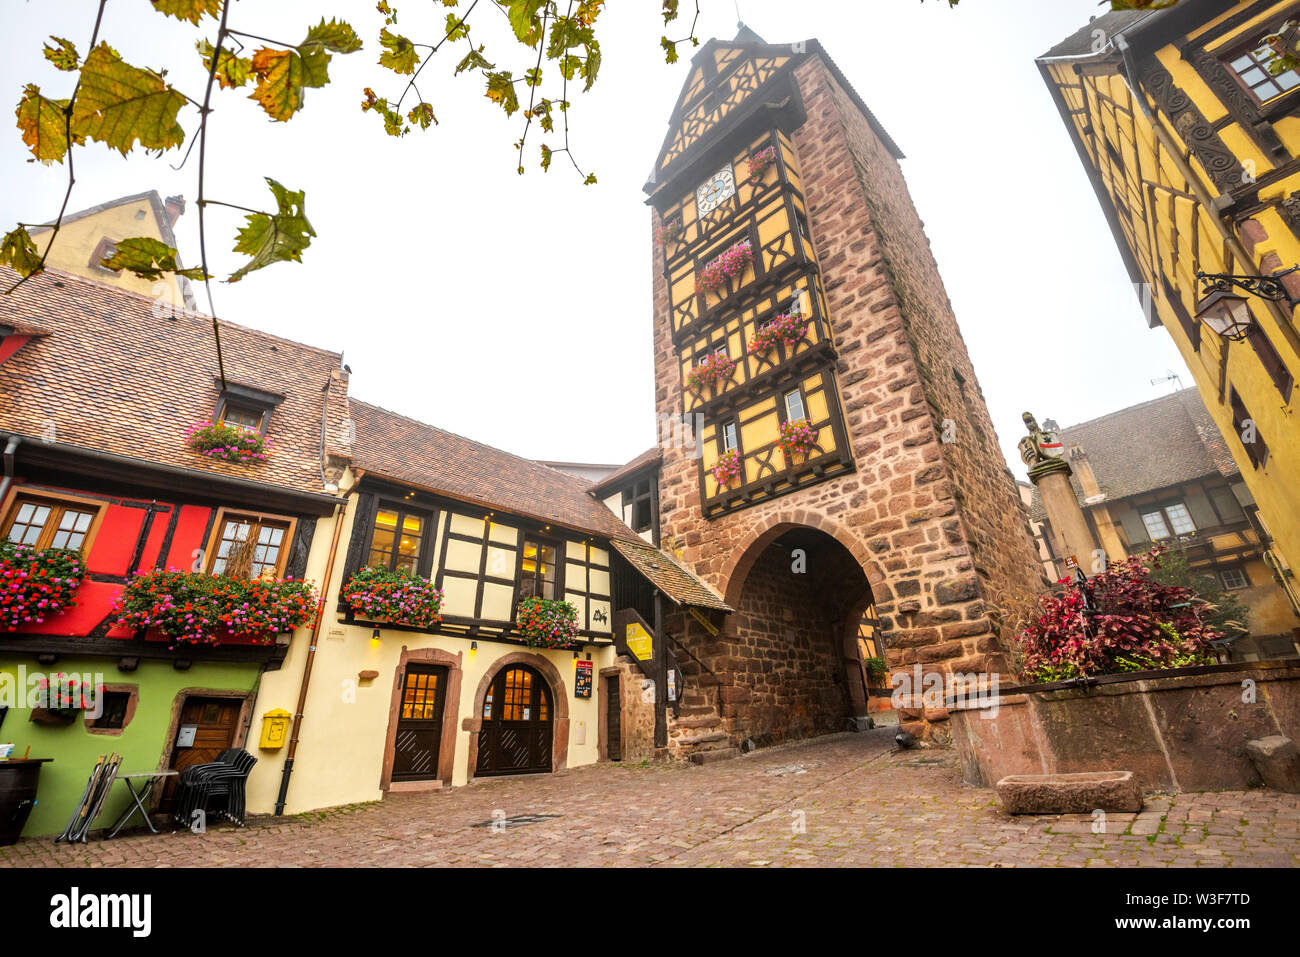 old town gate of the village Riquewihr with timberwork, Alsace Wine Route, France, the landmark Dolder tower and flower-bedecked well Stock Photo